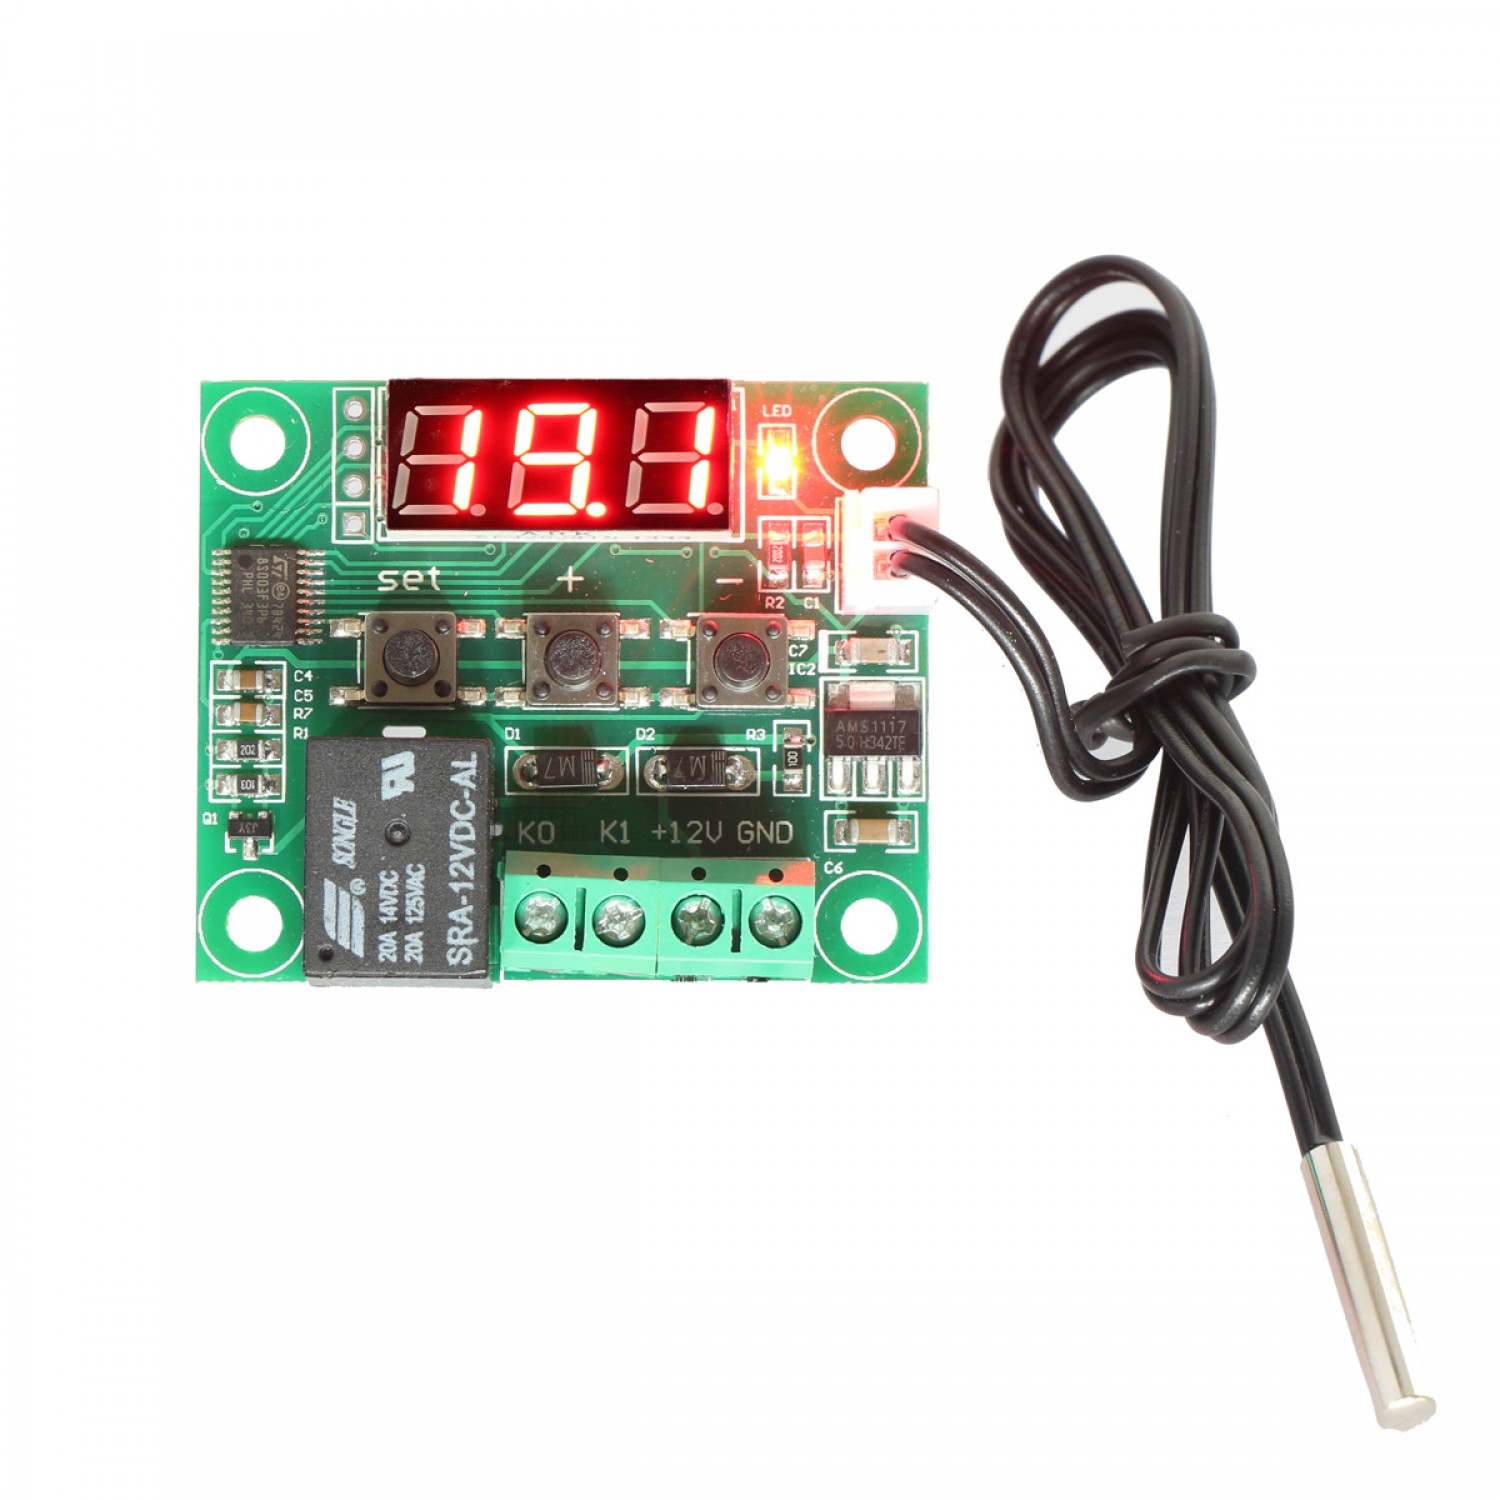 Icstation DC 12V Programmable Mini Digital Thermostat Temperature Controller Switch with Waterproof NTC Sensor Probe